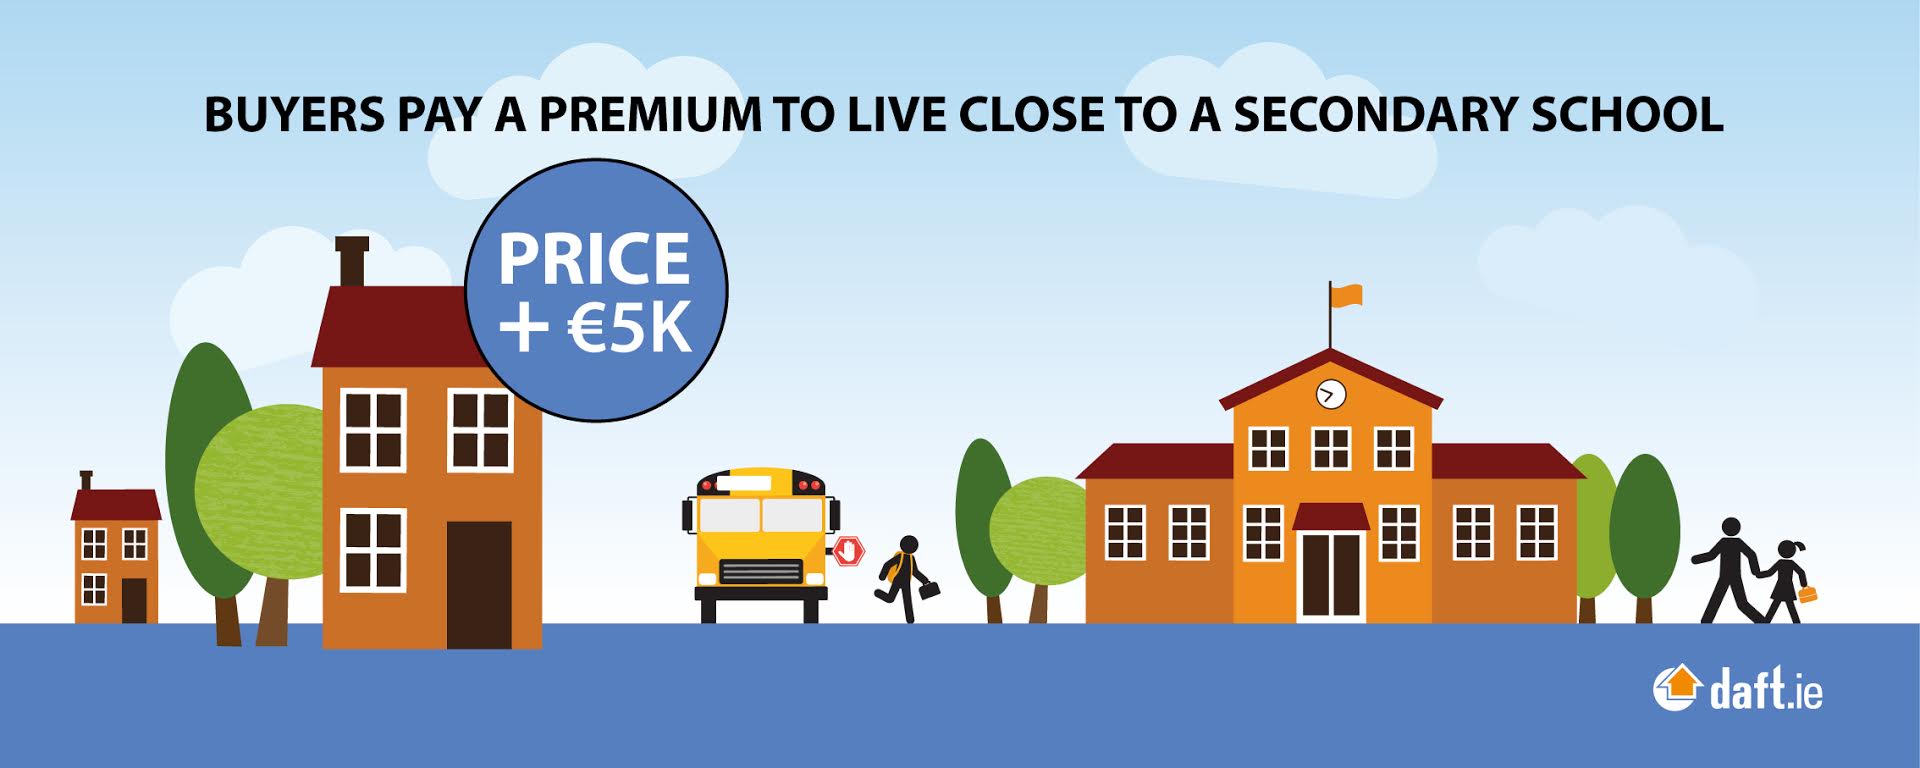 Buyers pay a premium to live close to a secondary school